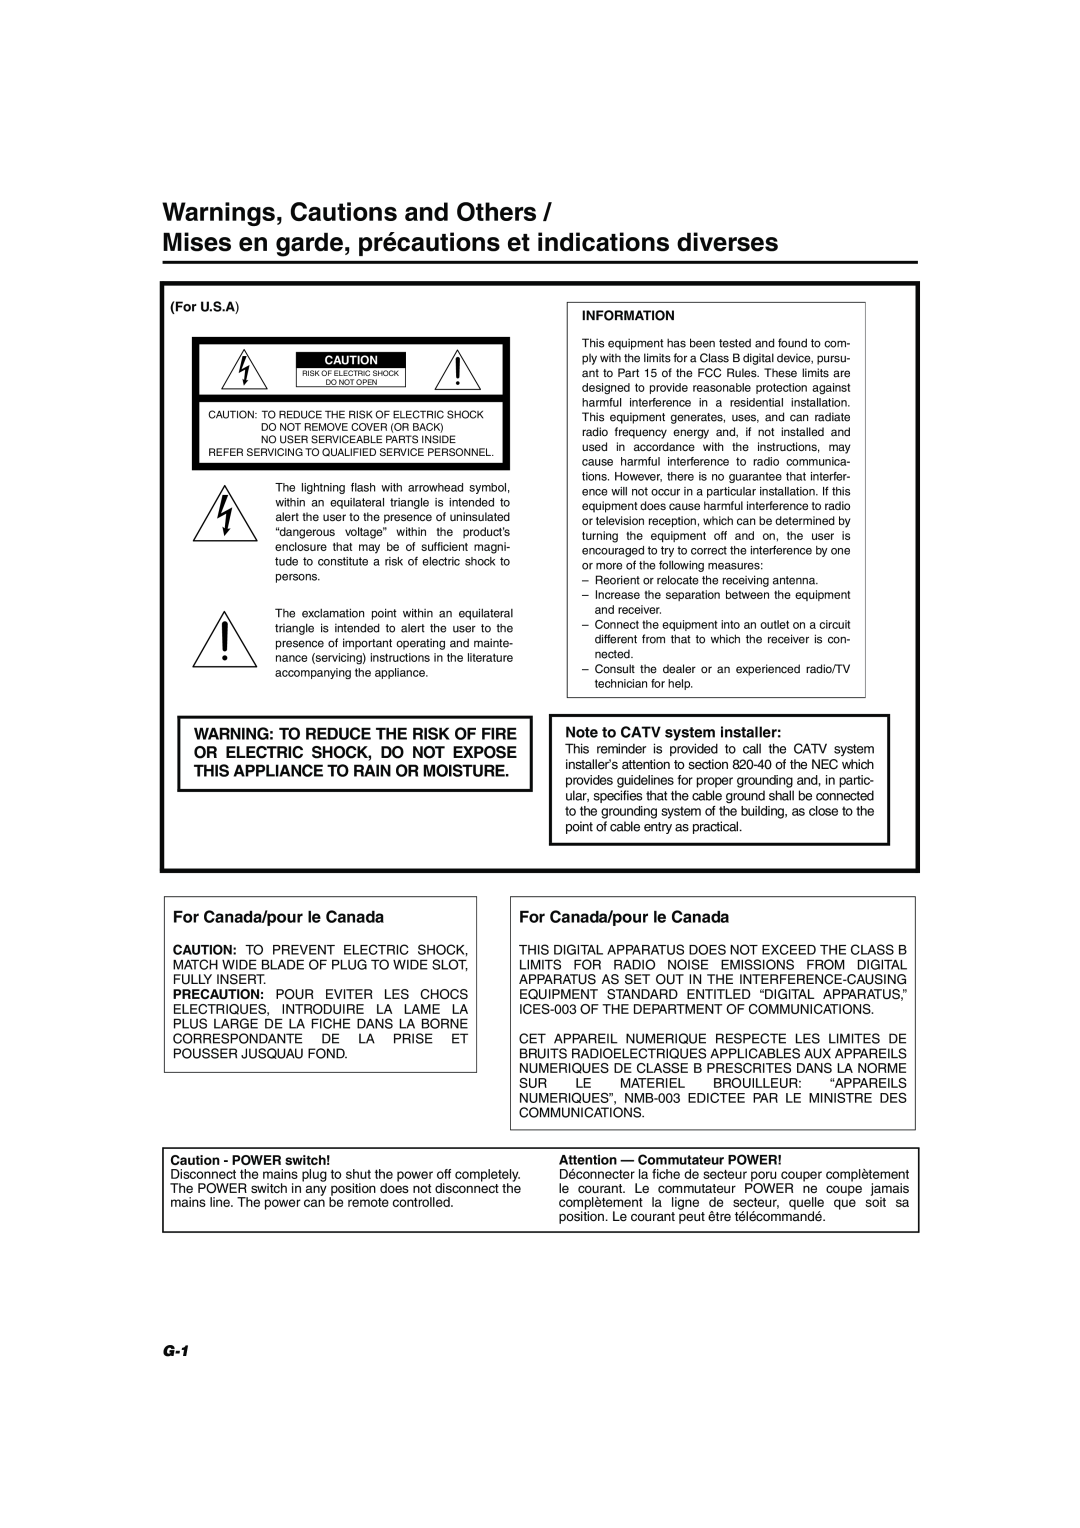 JVC MX-KB30 manual For Canada/pour le Canada, Warnings, Cautions and Others, Note to CATV system installer, For U.S.A 